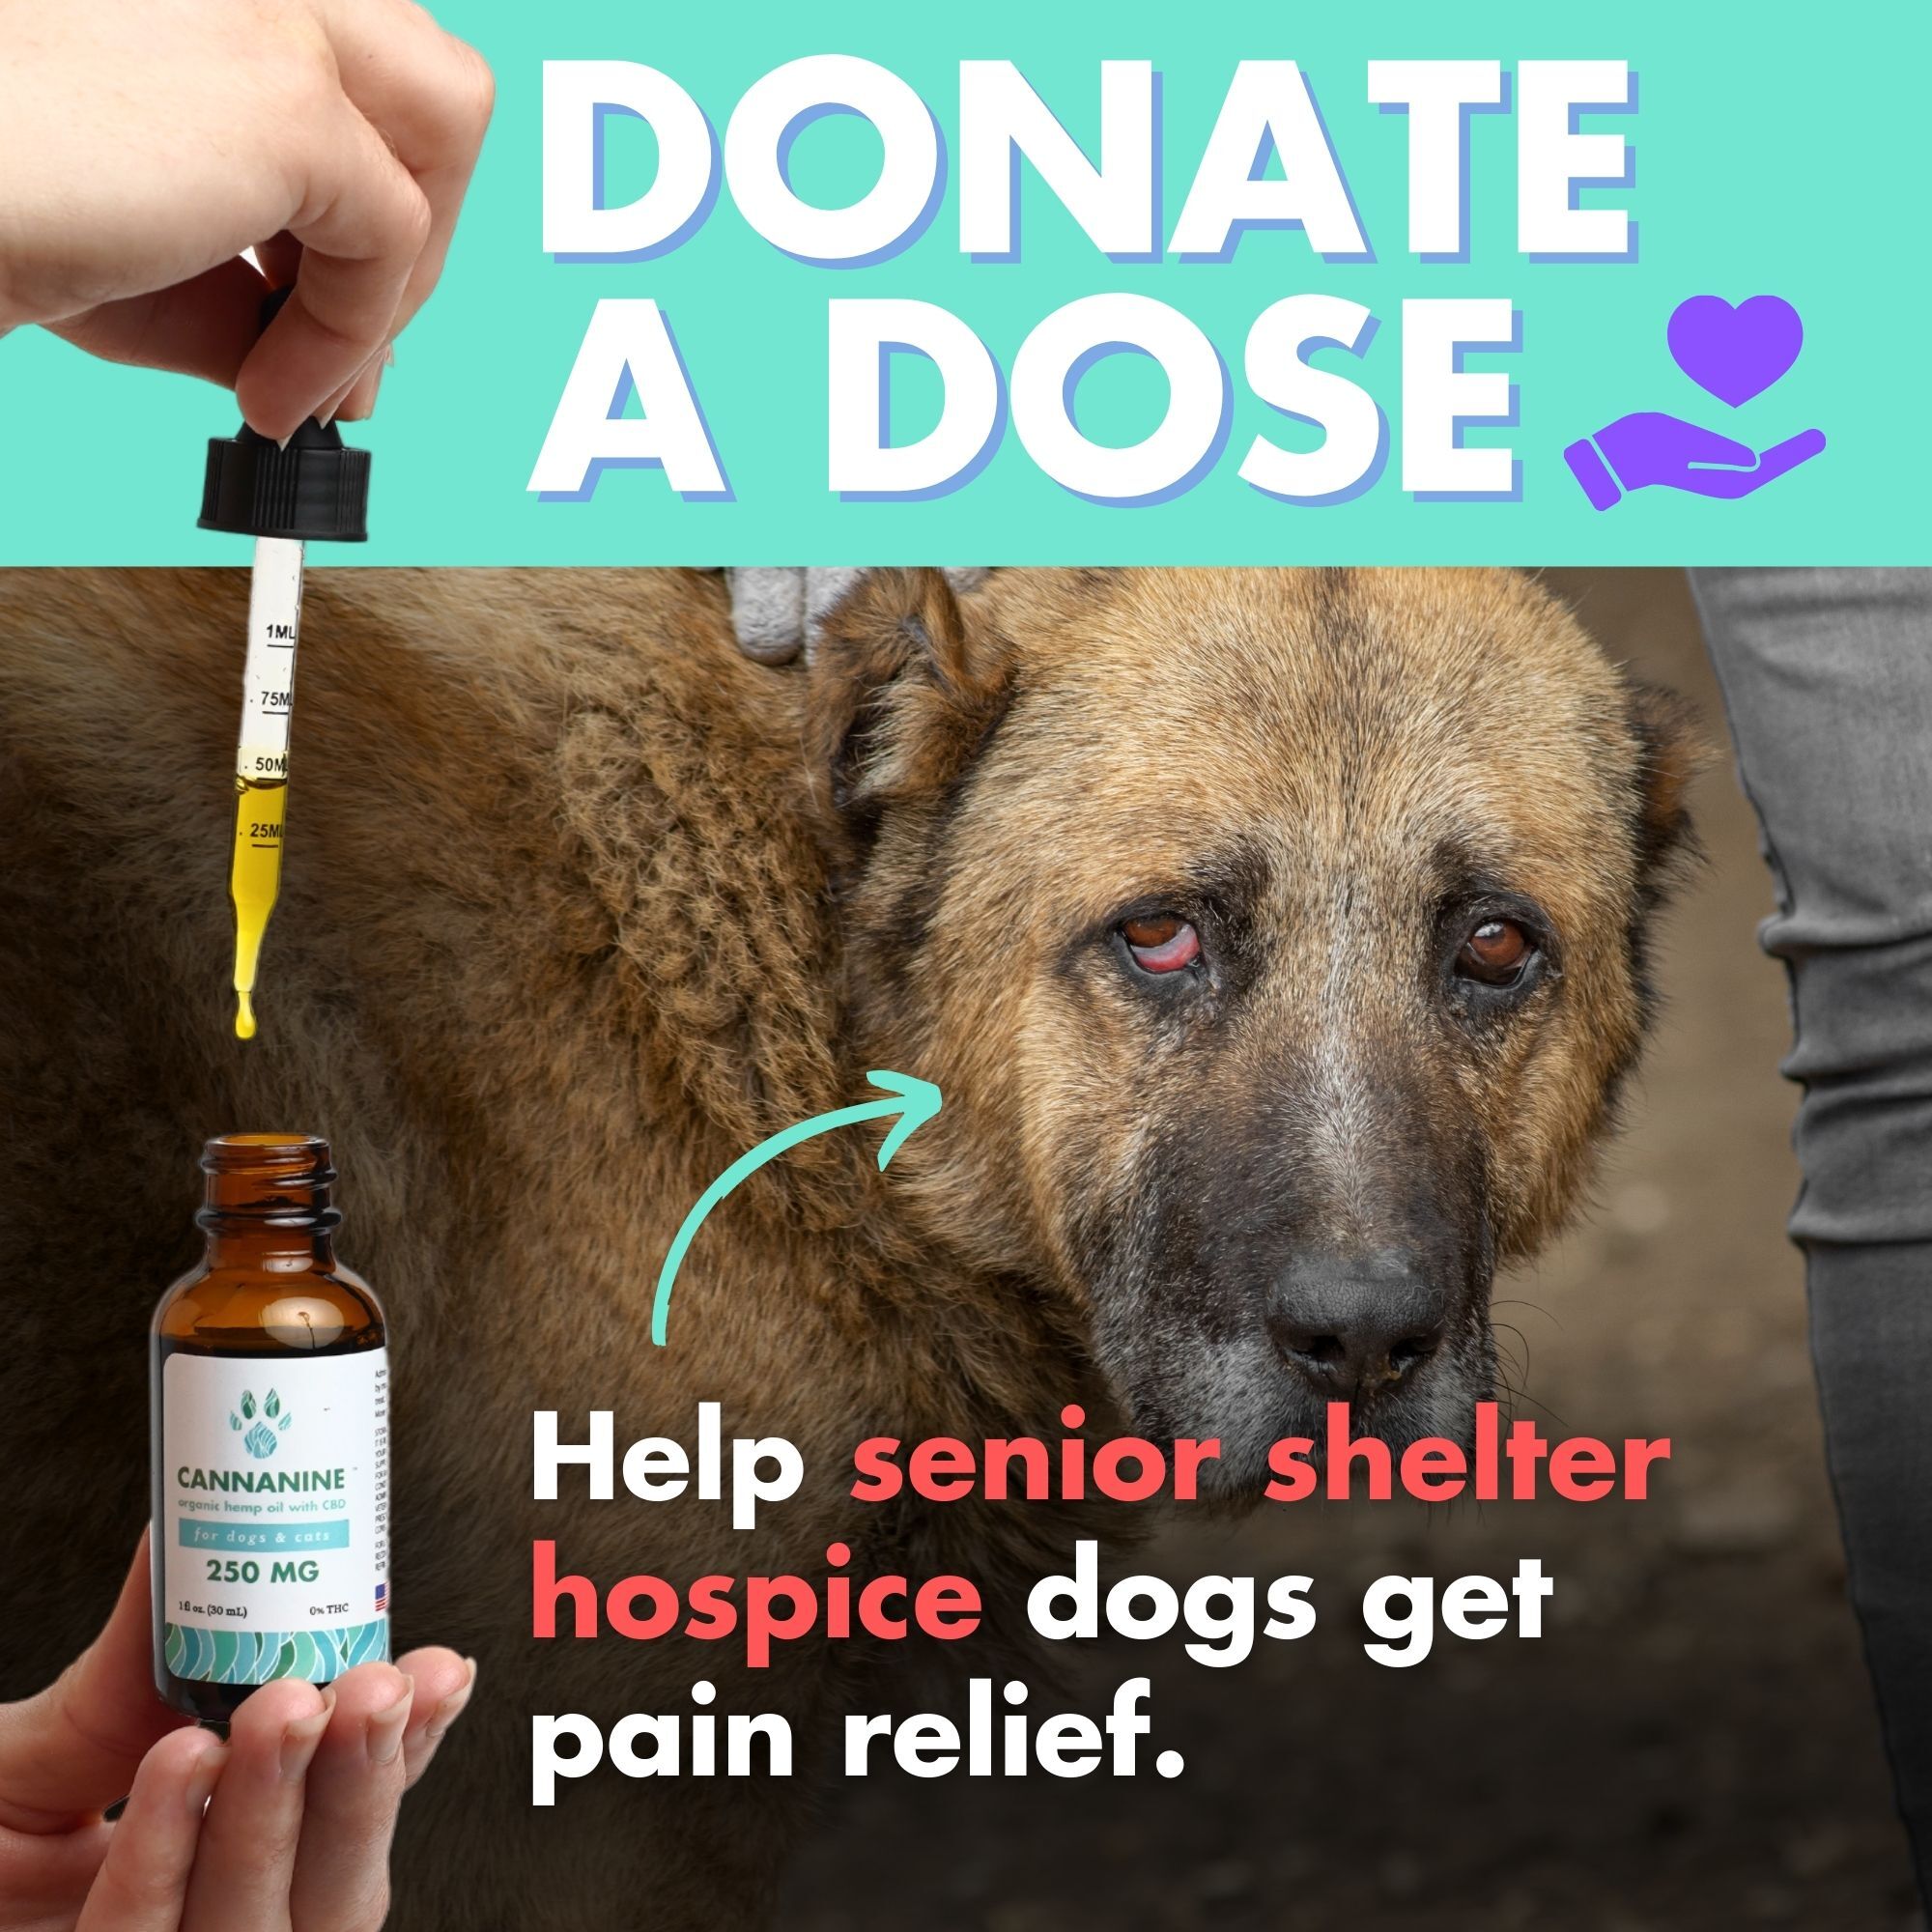 Donate A Dose - Help Senior Hospice Dogs Get Relief